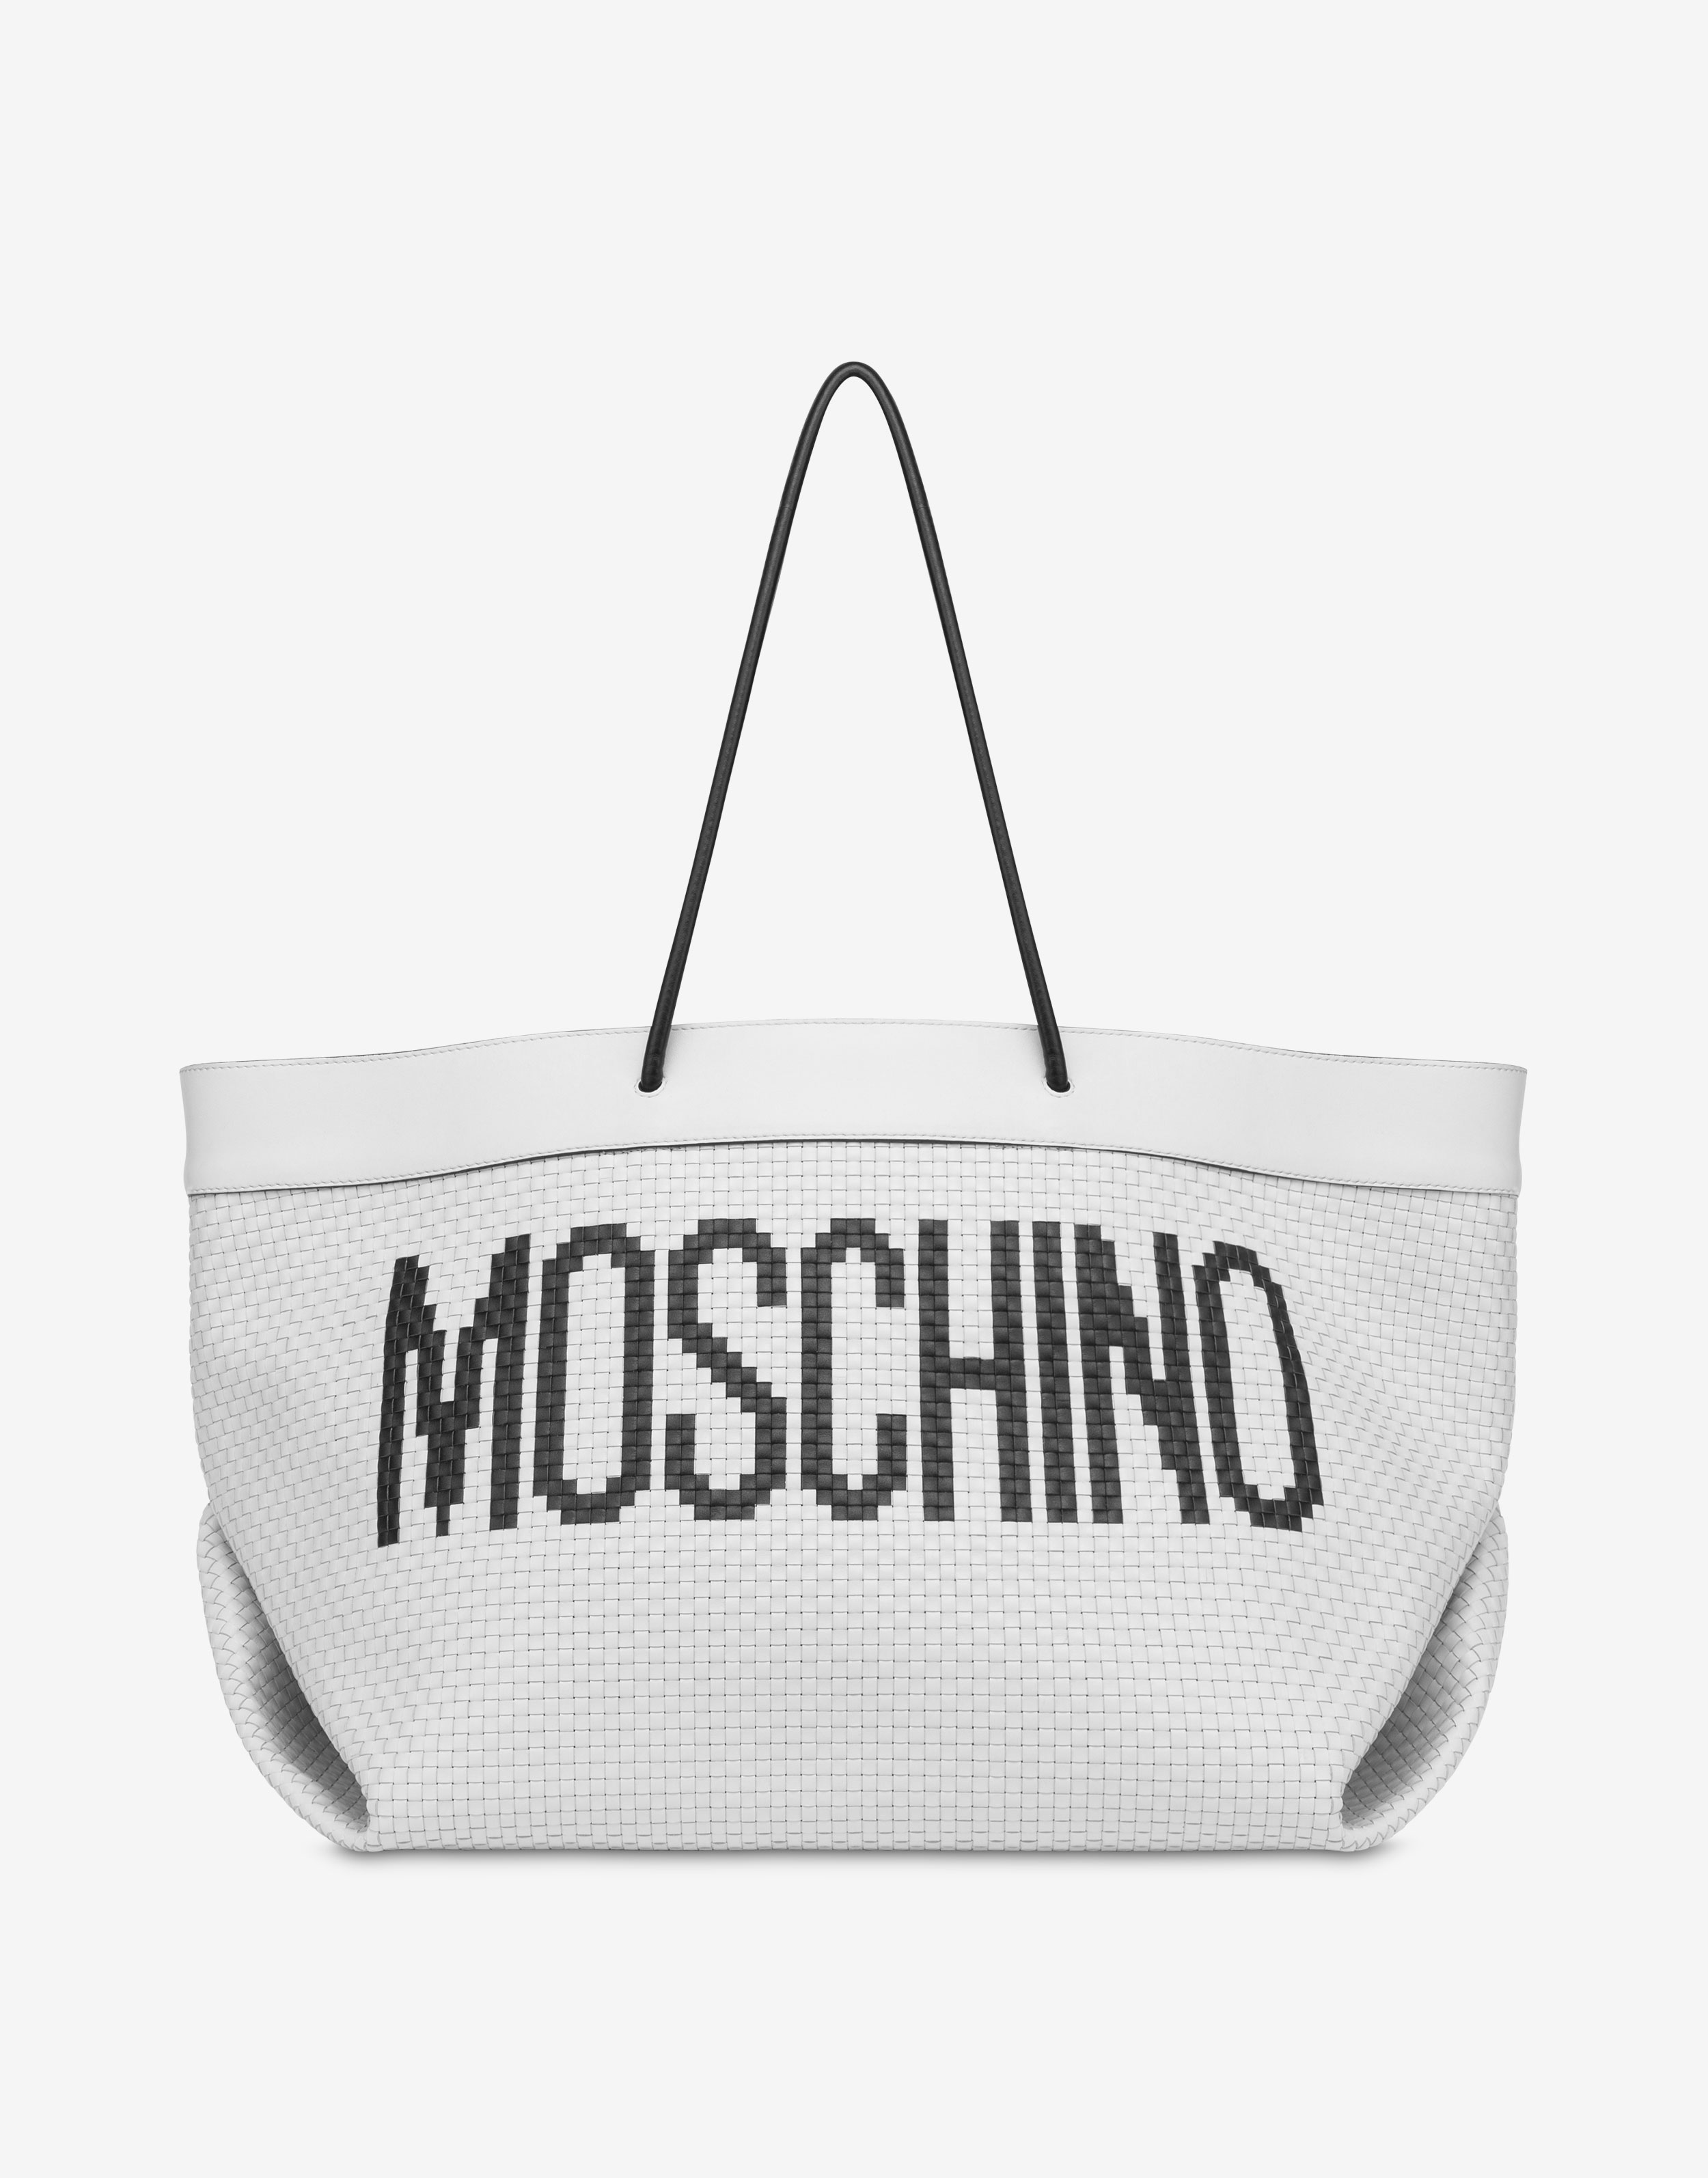 Love Moschino Shoulder & Sling Bags outlet - 1800 products on sale |  FASHIOLA.co.uk